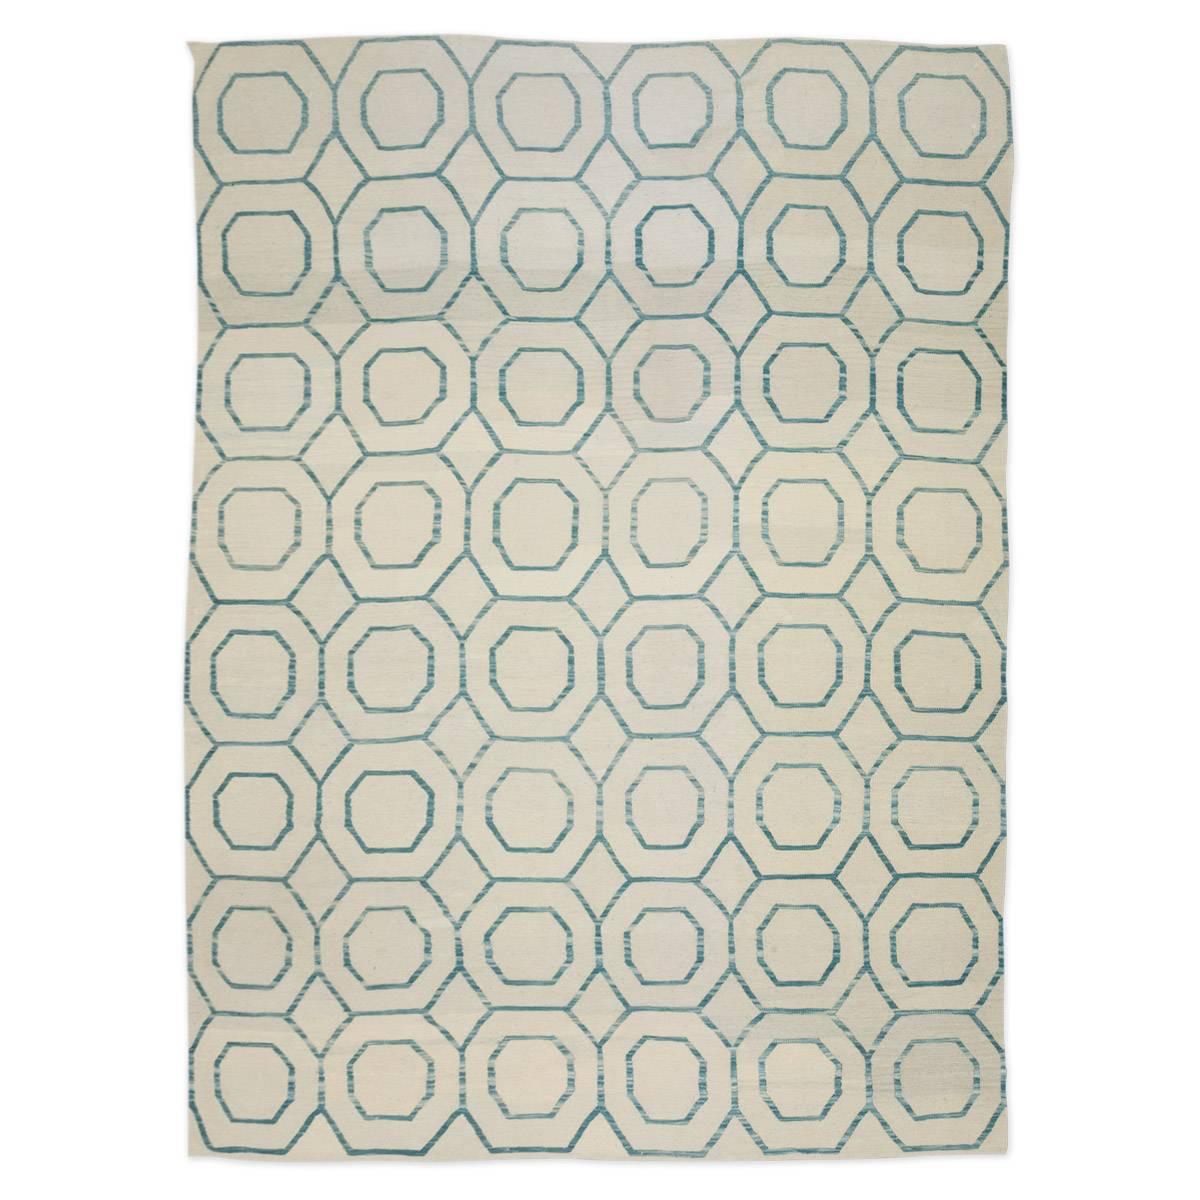 21st Century Contemporary Kilim Wool Rug, Green Colors over Geometric Design 